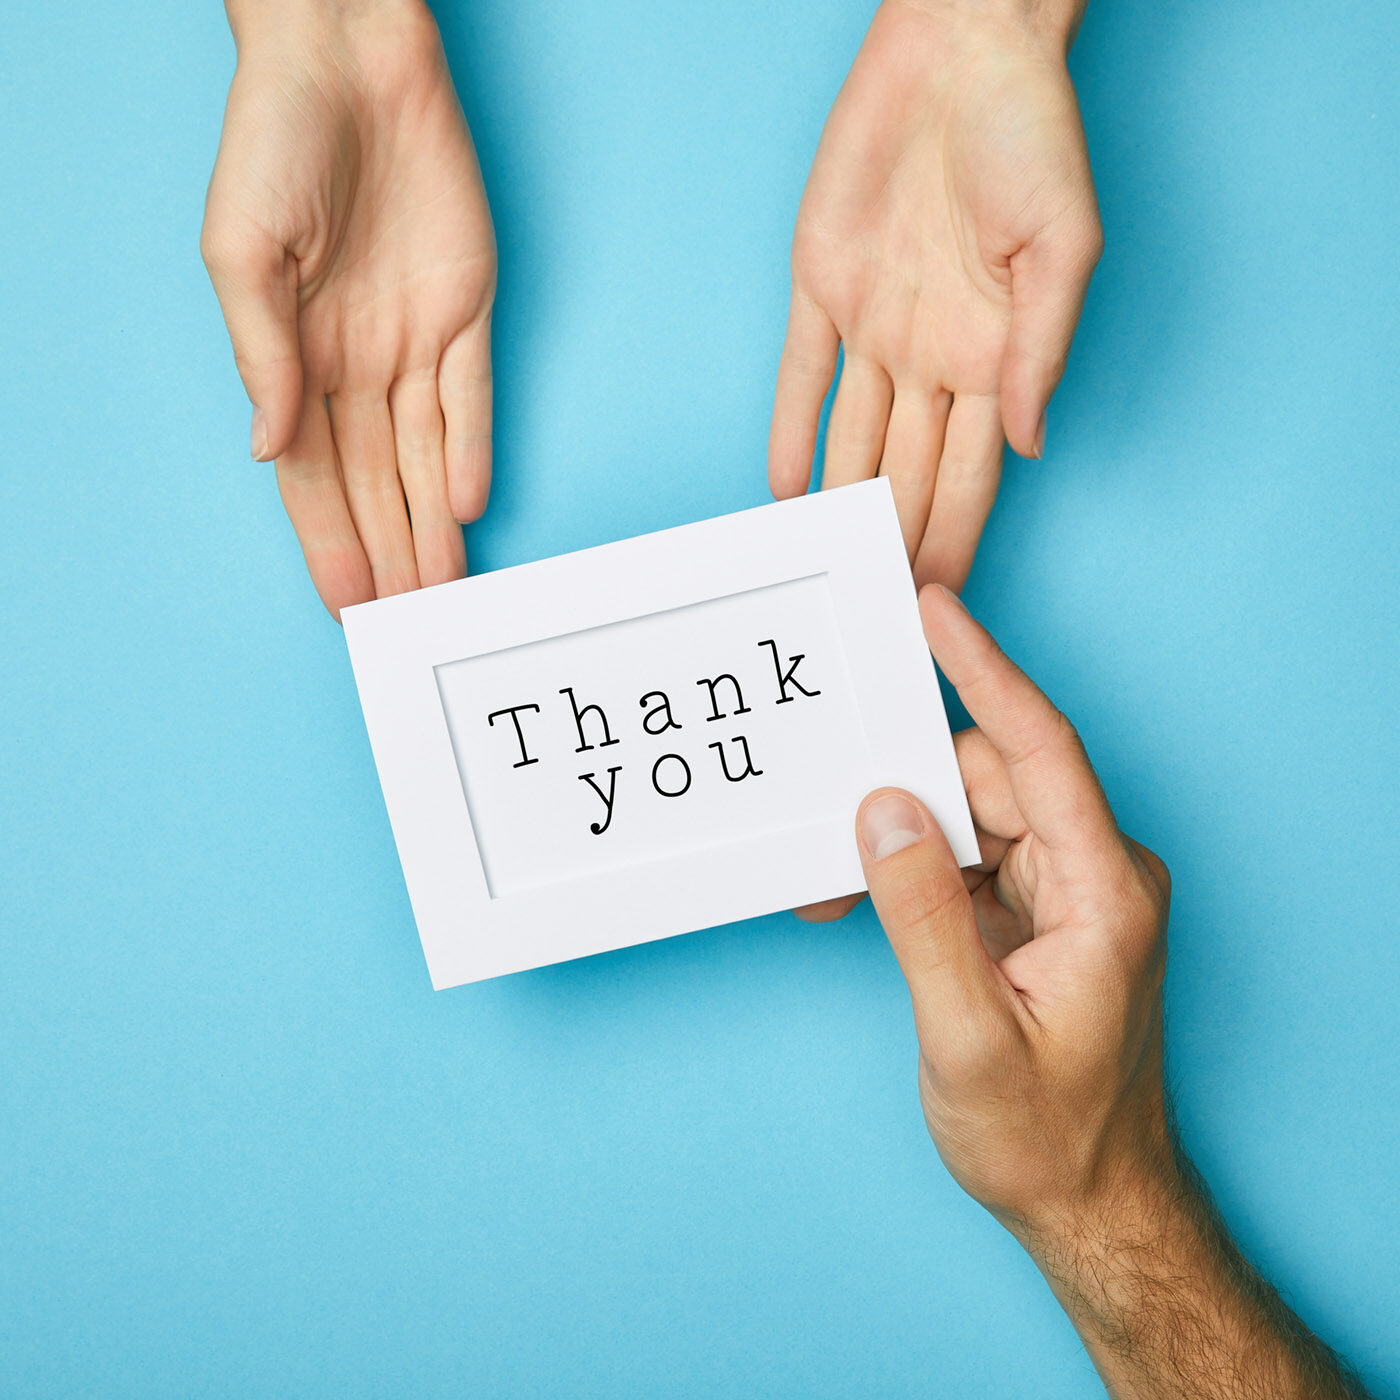 cropped view of man giving white card in frame with thank you lettering to woman on blue background